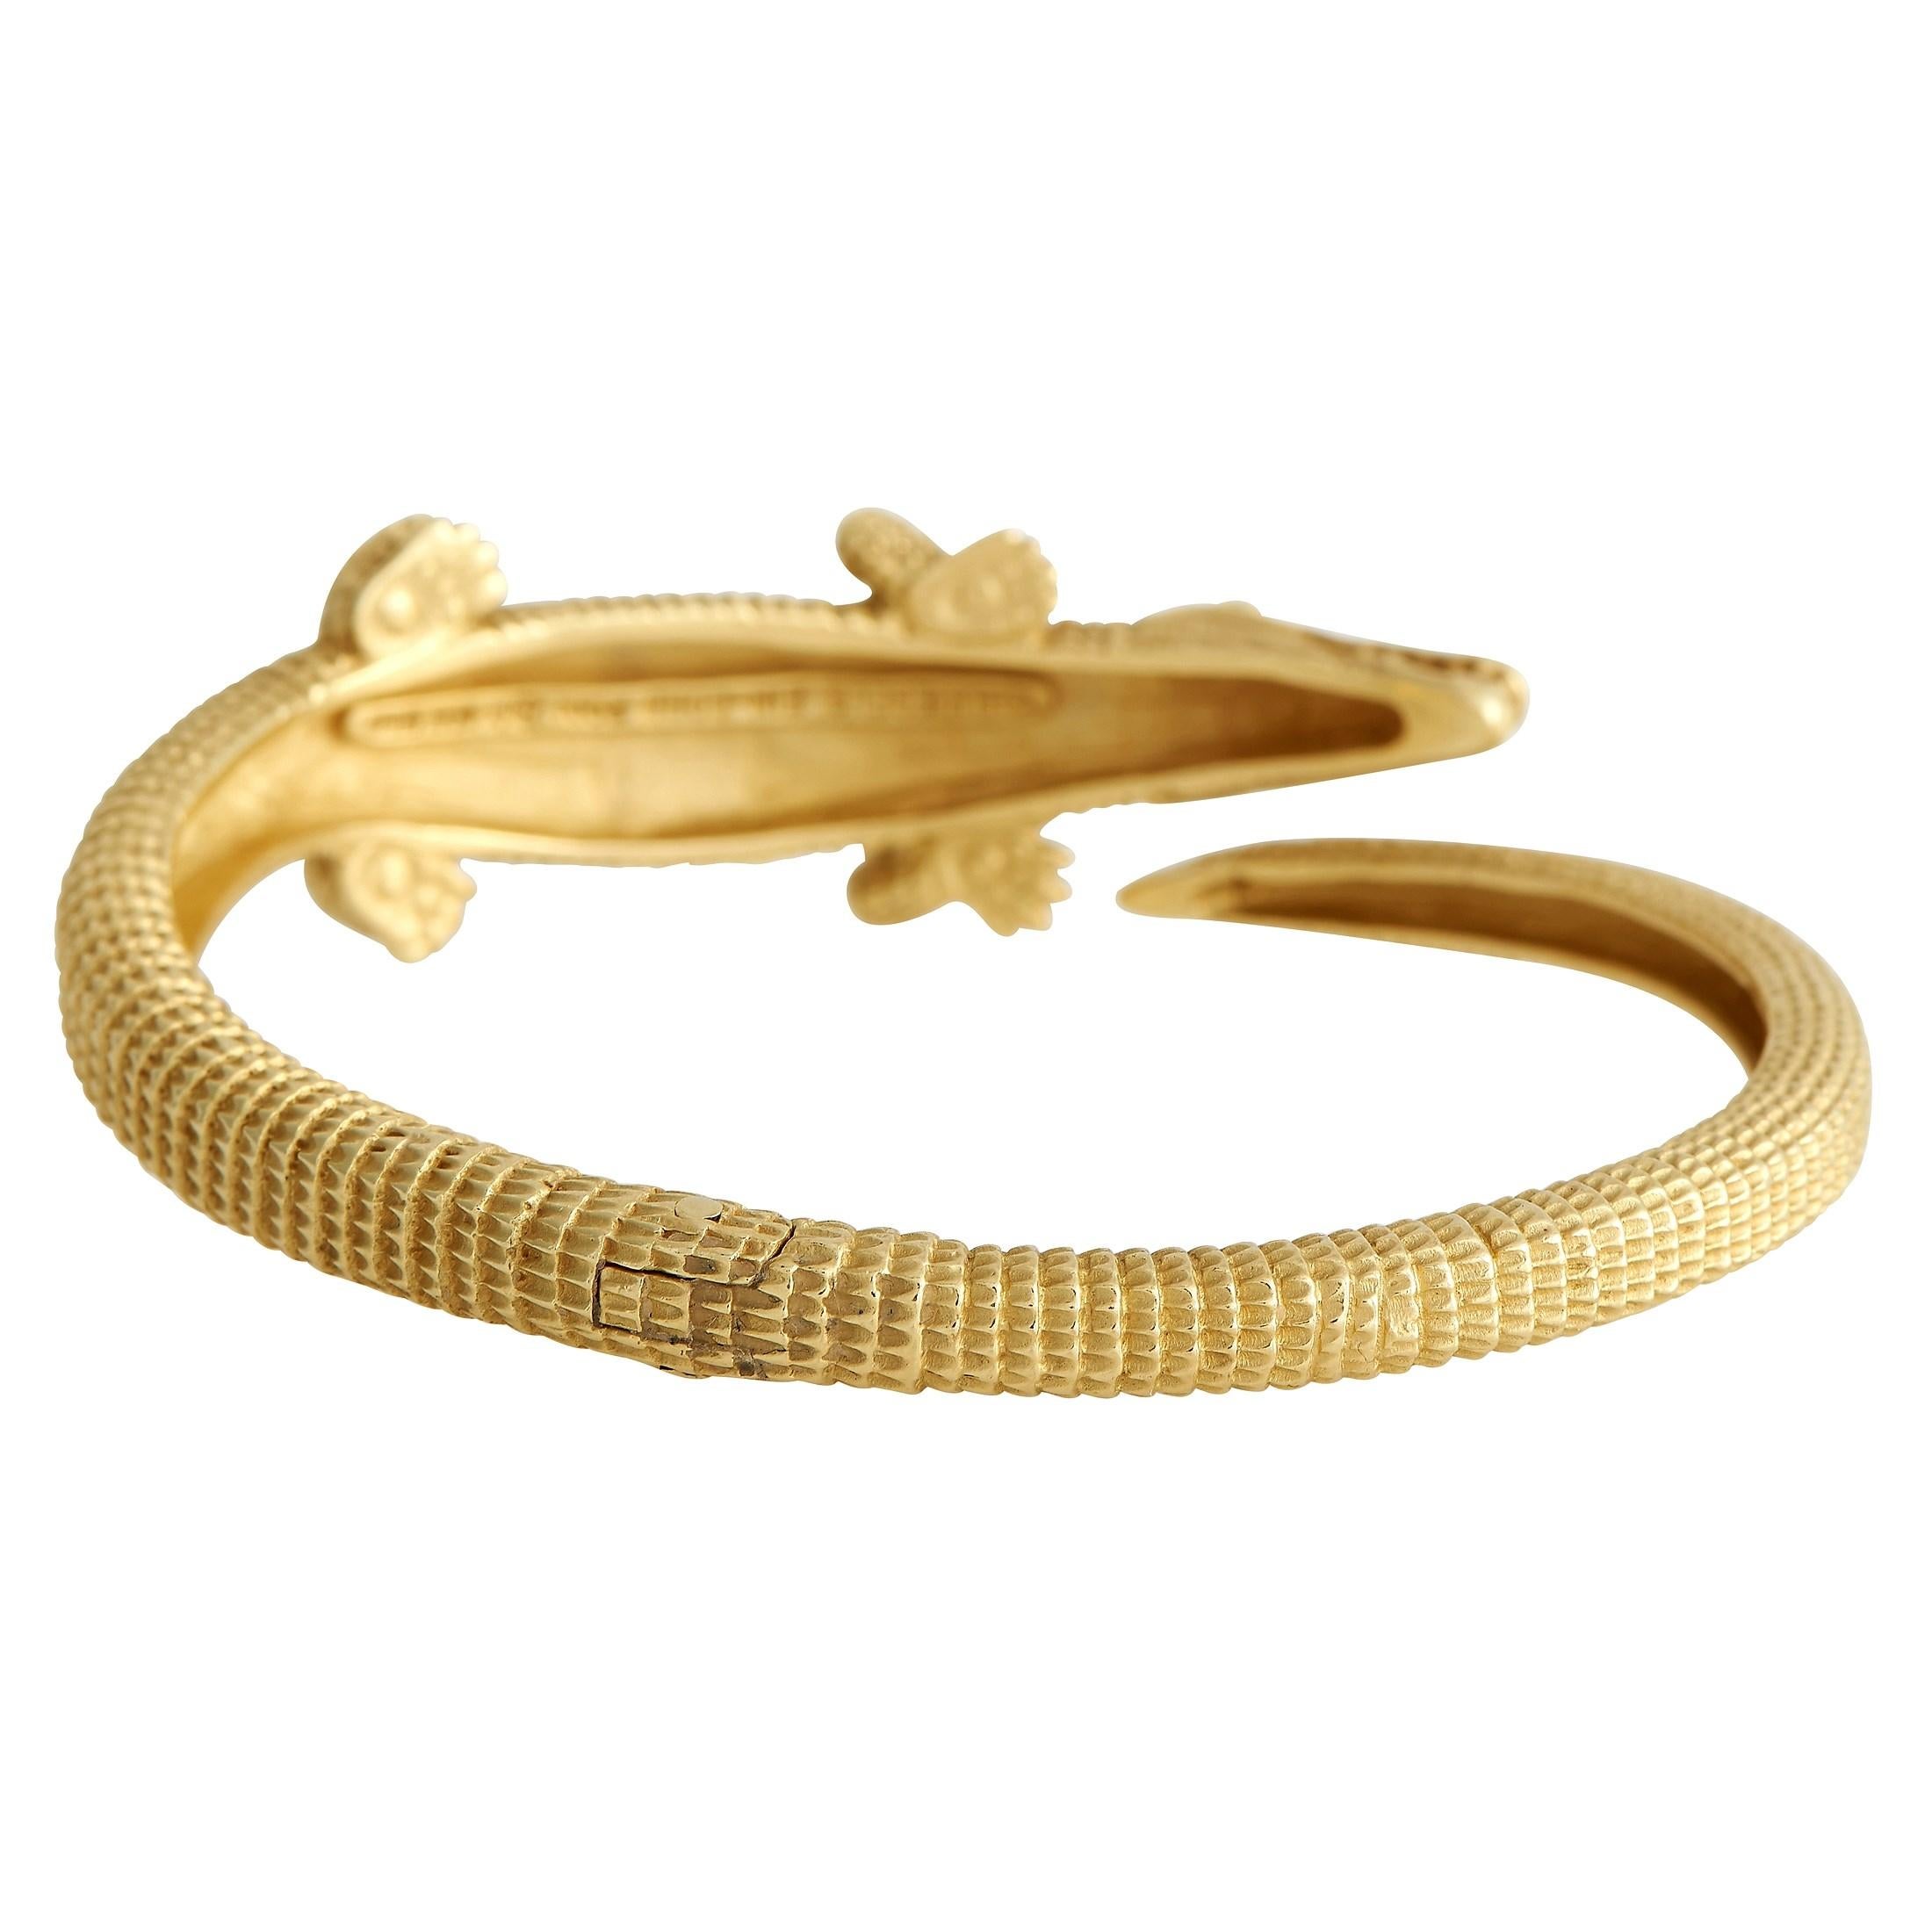 Indulge your wild side and wear this Kieselstein-Cord 18K Yellow Gold Alligator Bracelet loud and proud. This solid 18K yellow gold-hinged bangle measures 7.5 inches long and features a carved and sculpted alligator design. Made by an award-winning